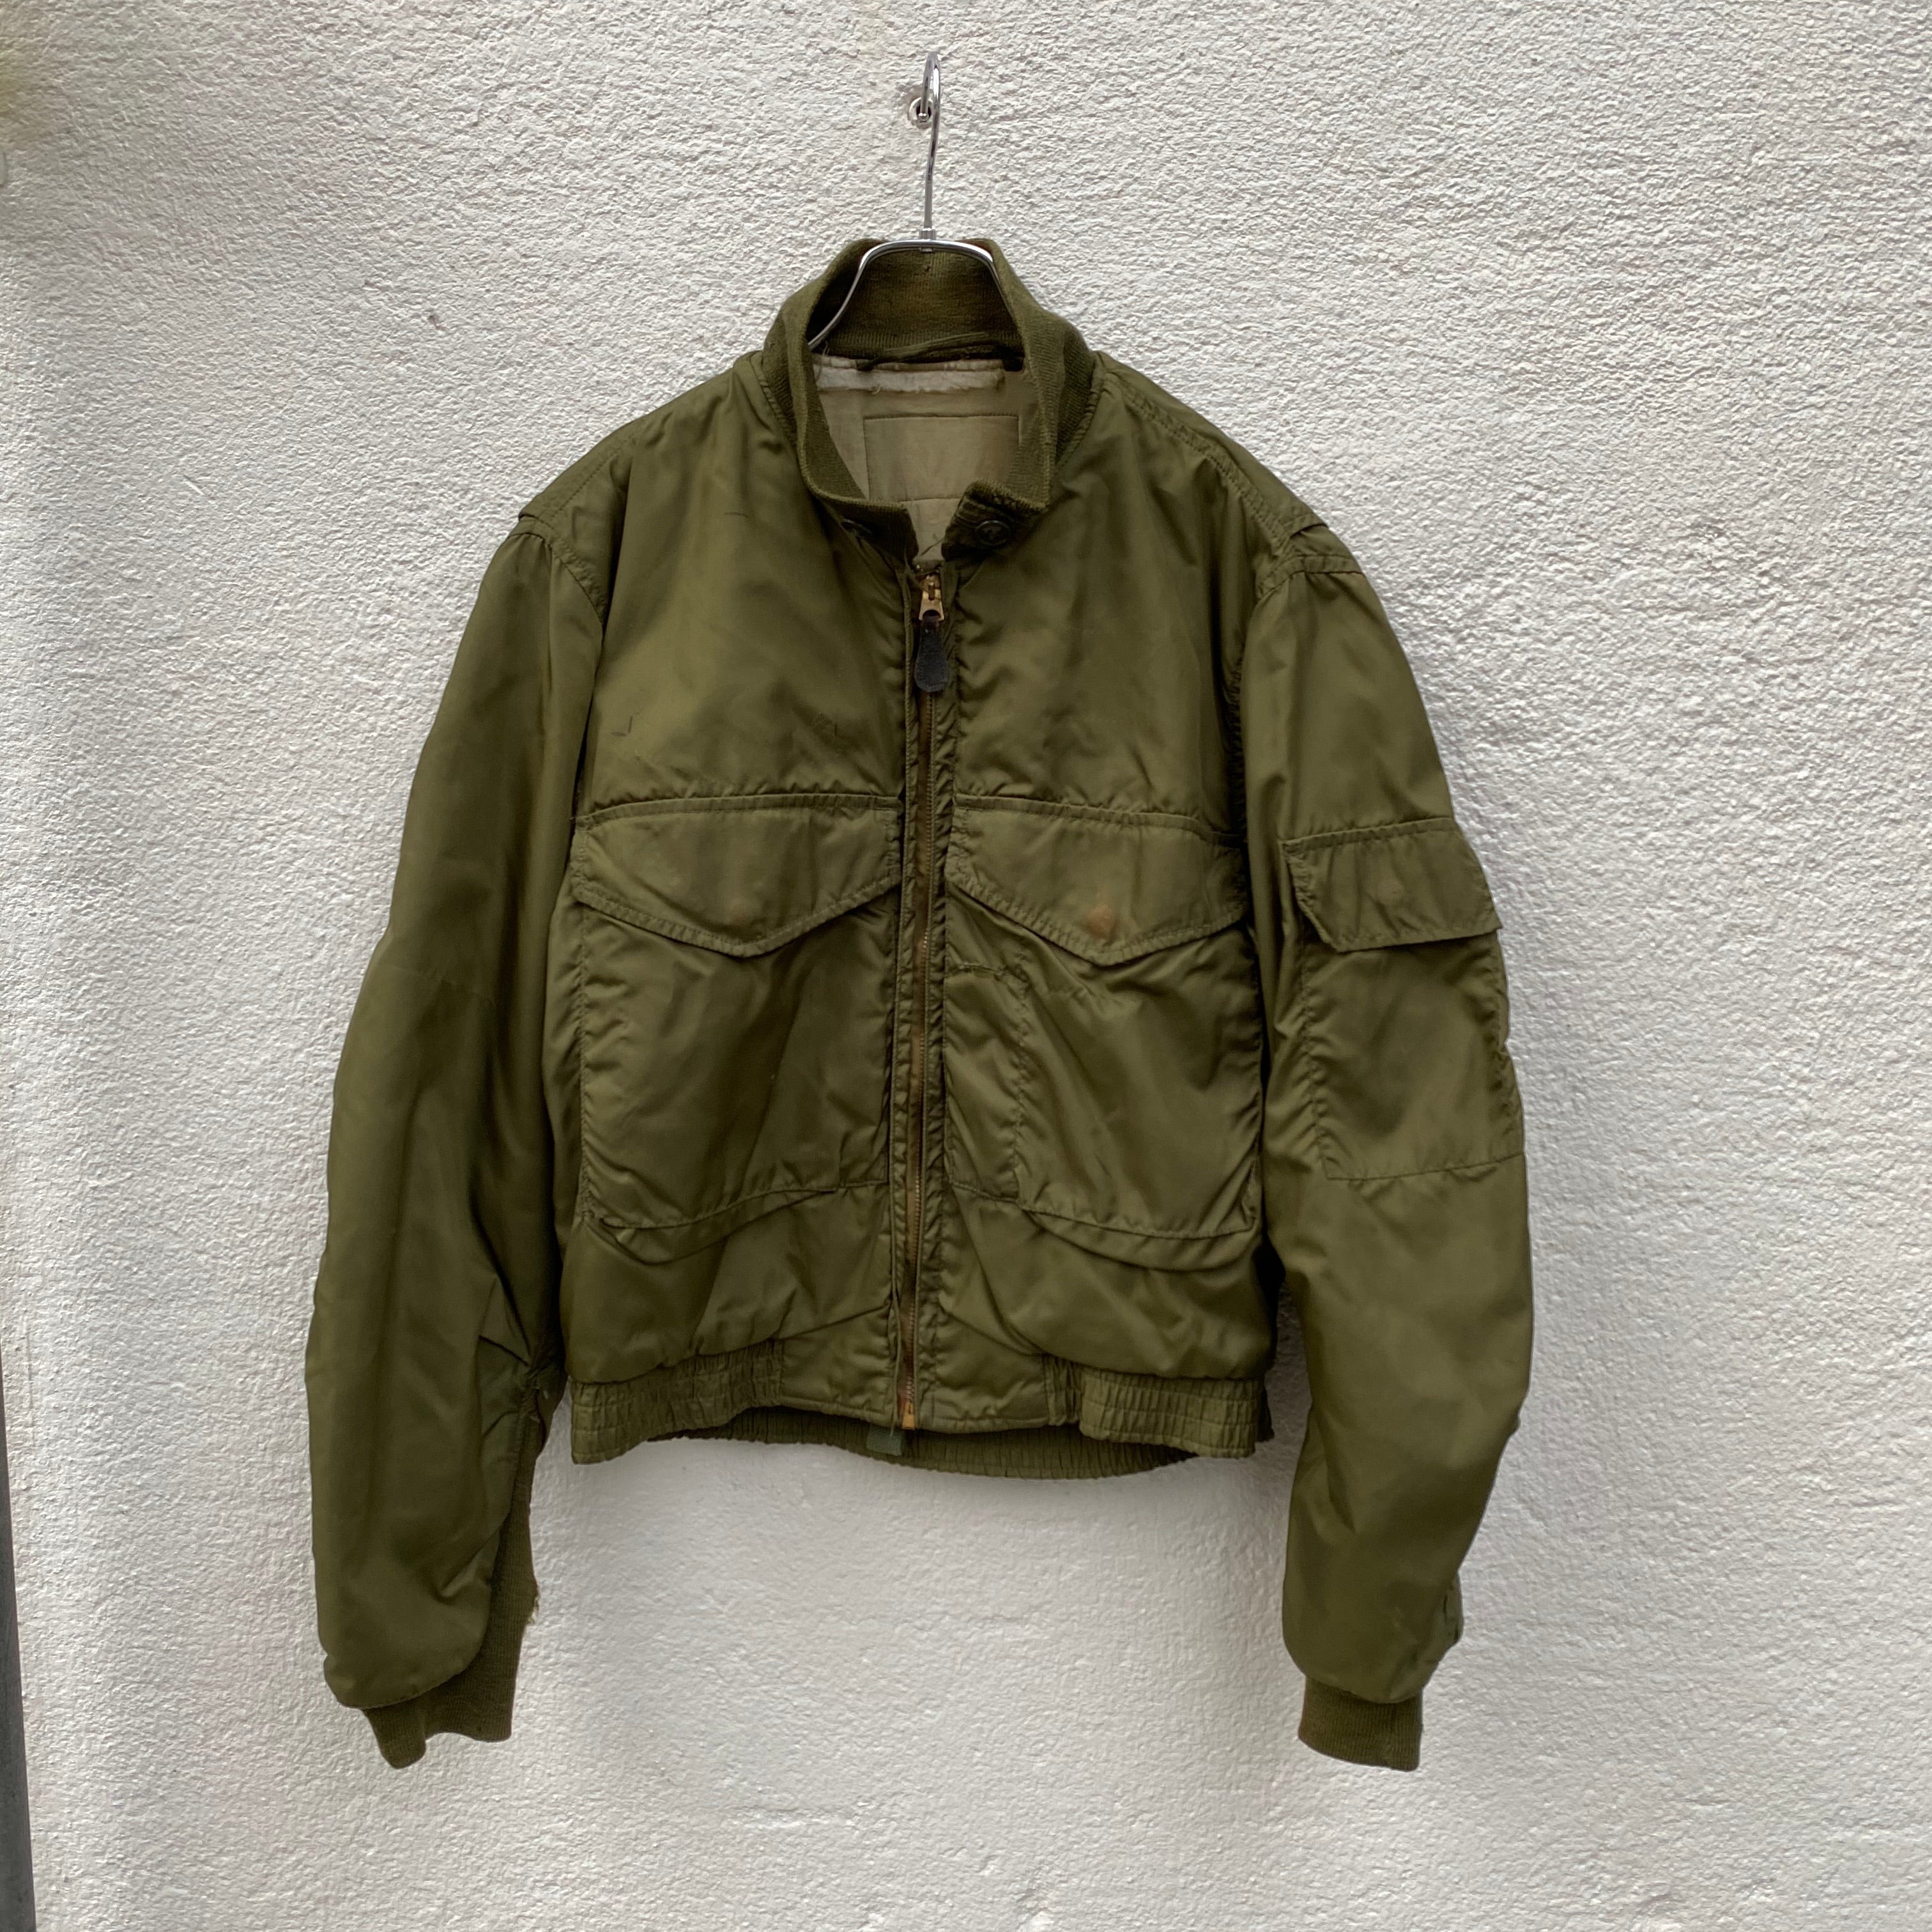 [ ONLY ONE ! ] USN G-8 "WEP" FRIGHT JACKET / Mr.Clean Select